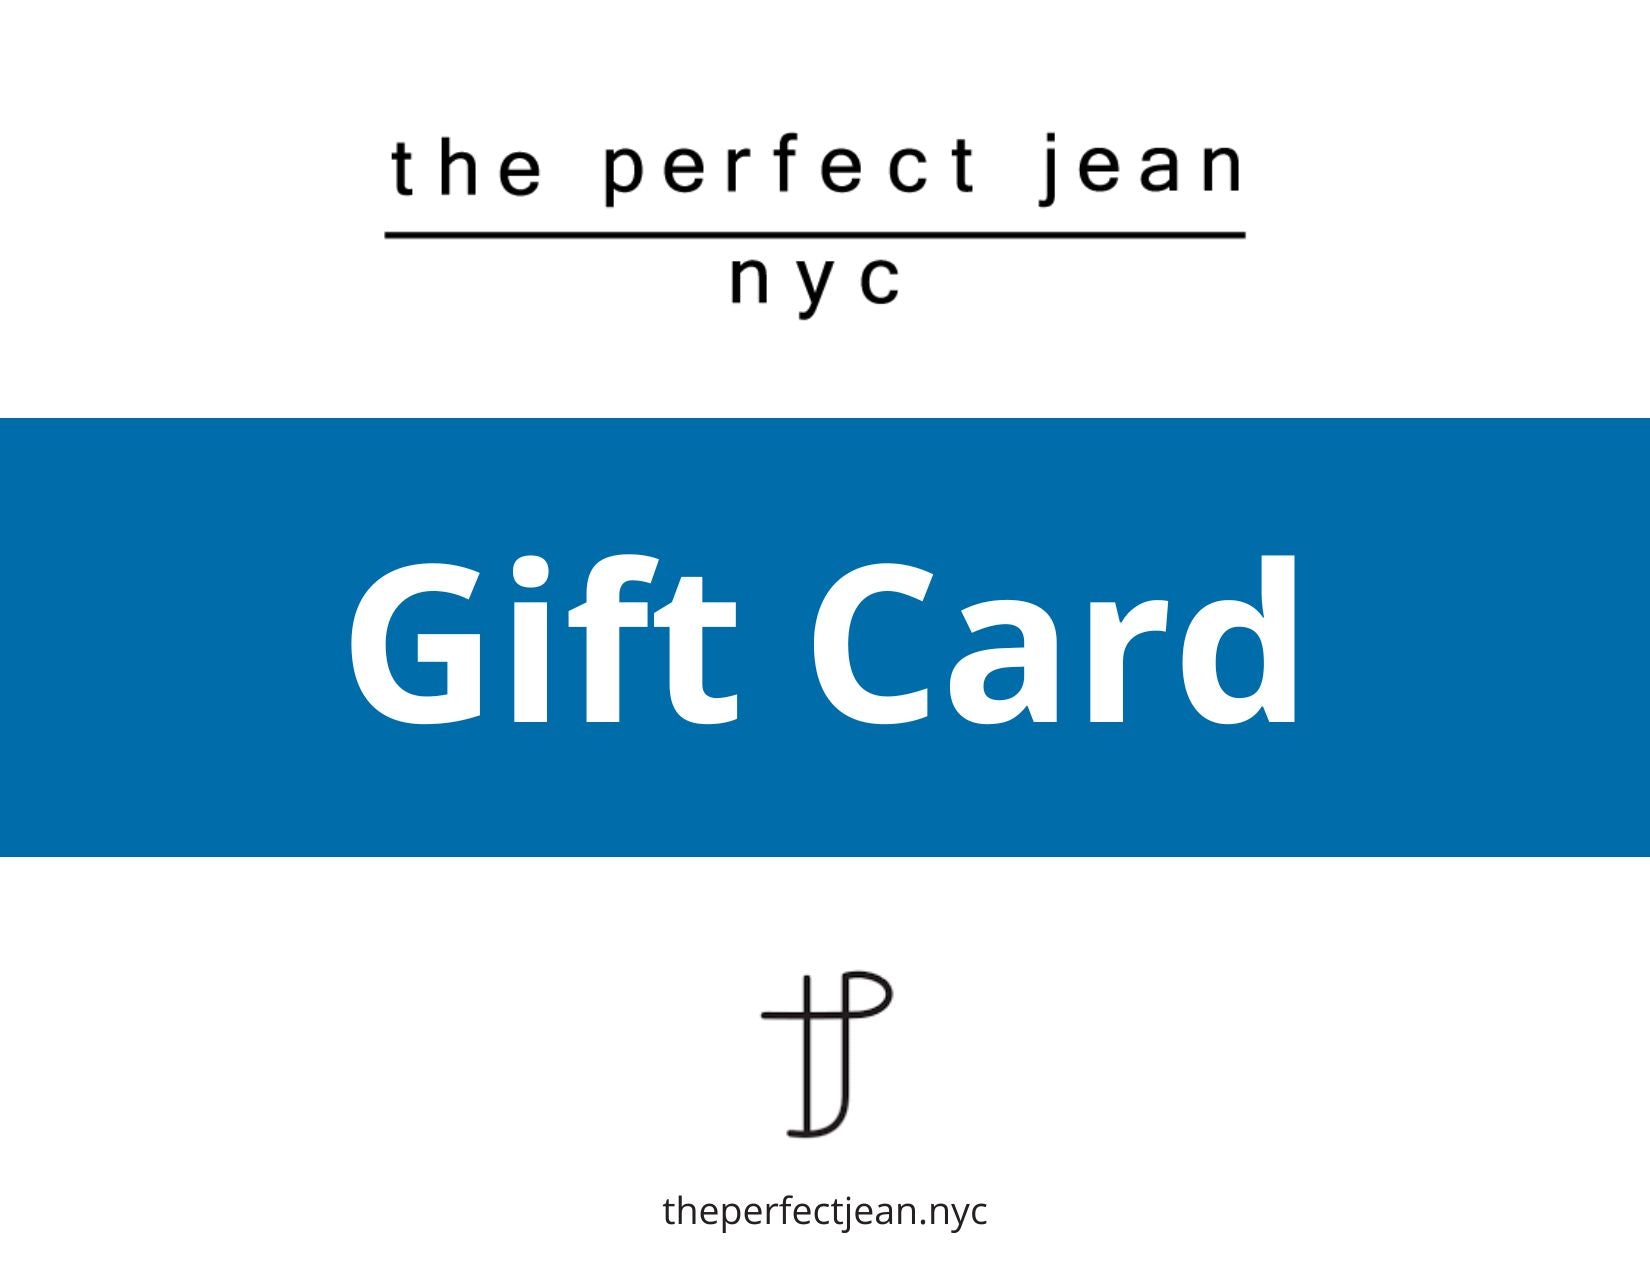 The Perfect Jean Gift Card